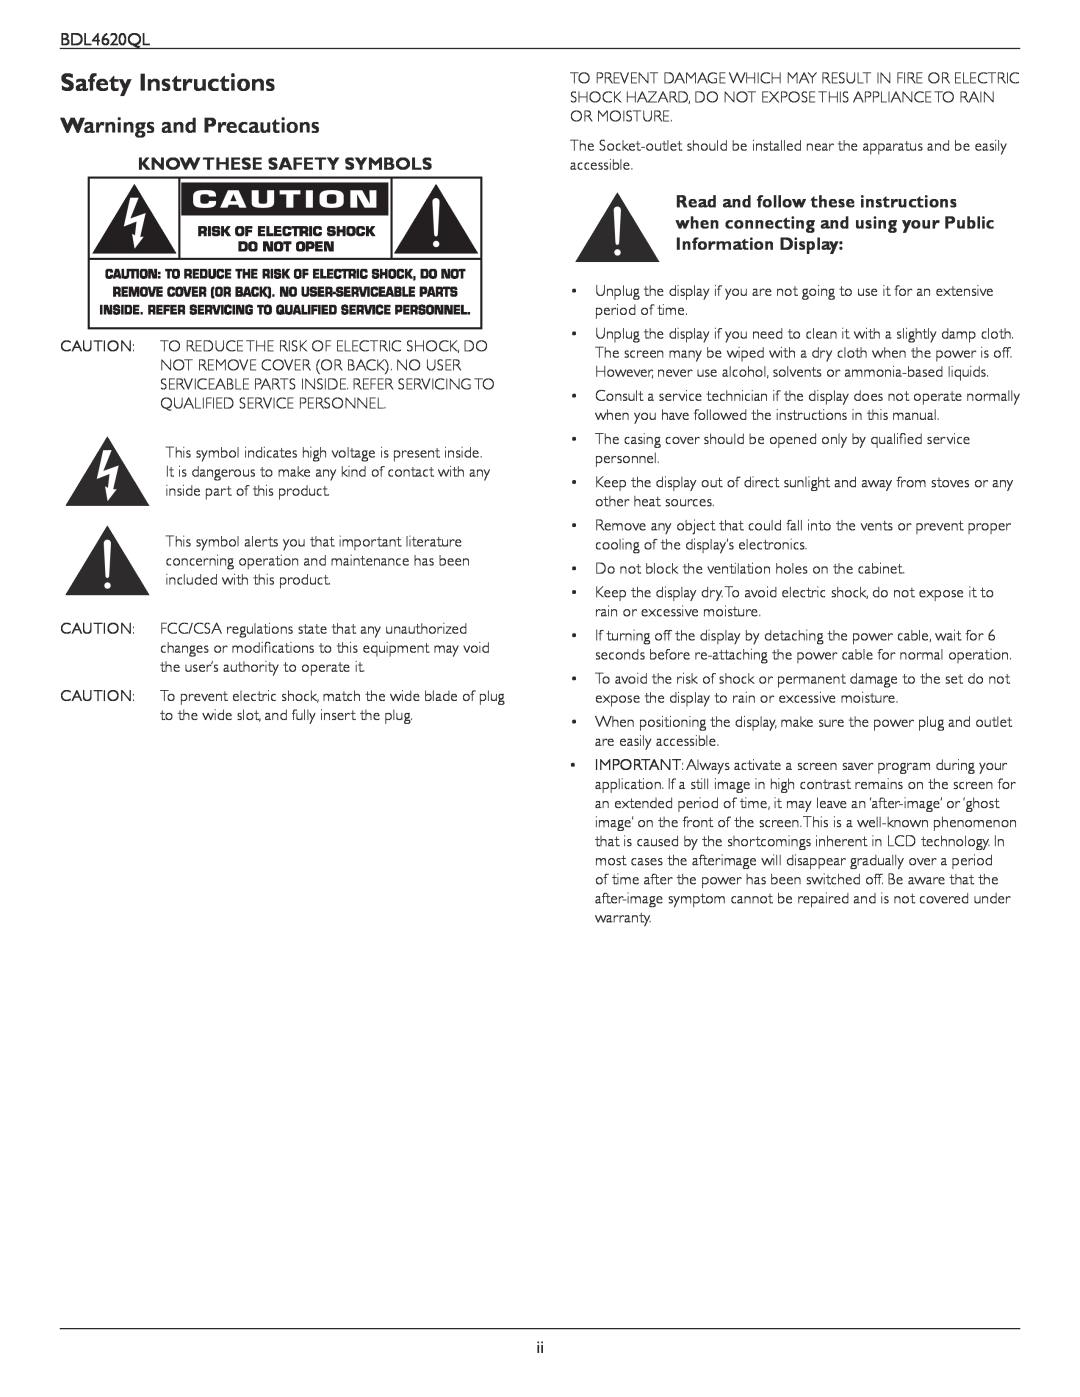 Philips BDL4620QL user manual Safety Instructions, Warnings and Precautions, Know These Safety Symbols, Information Display 